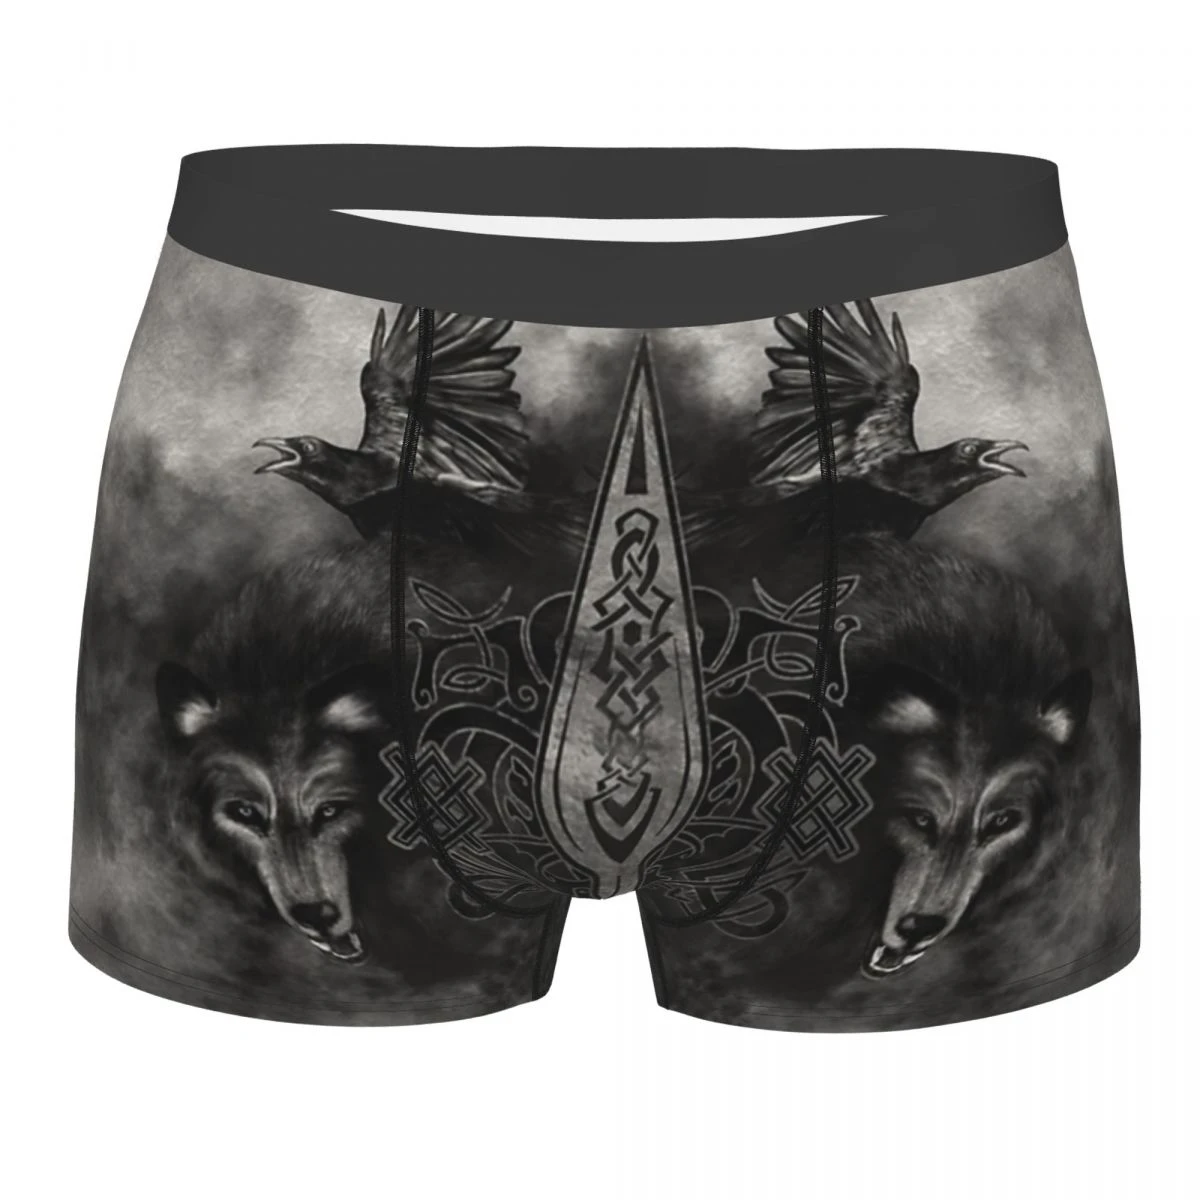 Man Boxer Briefs Shorts Panties Gungnir Spear Of Odin Soft Underwear Vikings Homme Funny S-XXL Underpants polyester boxers